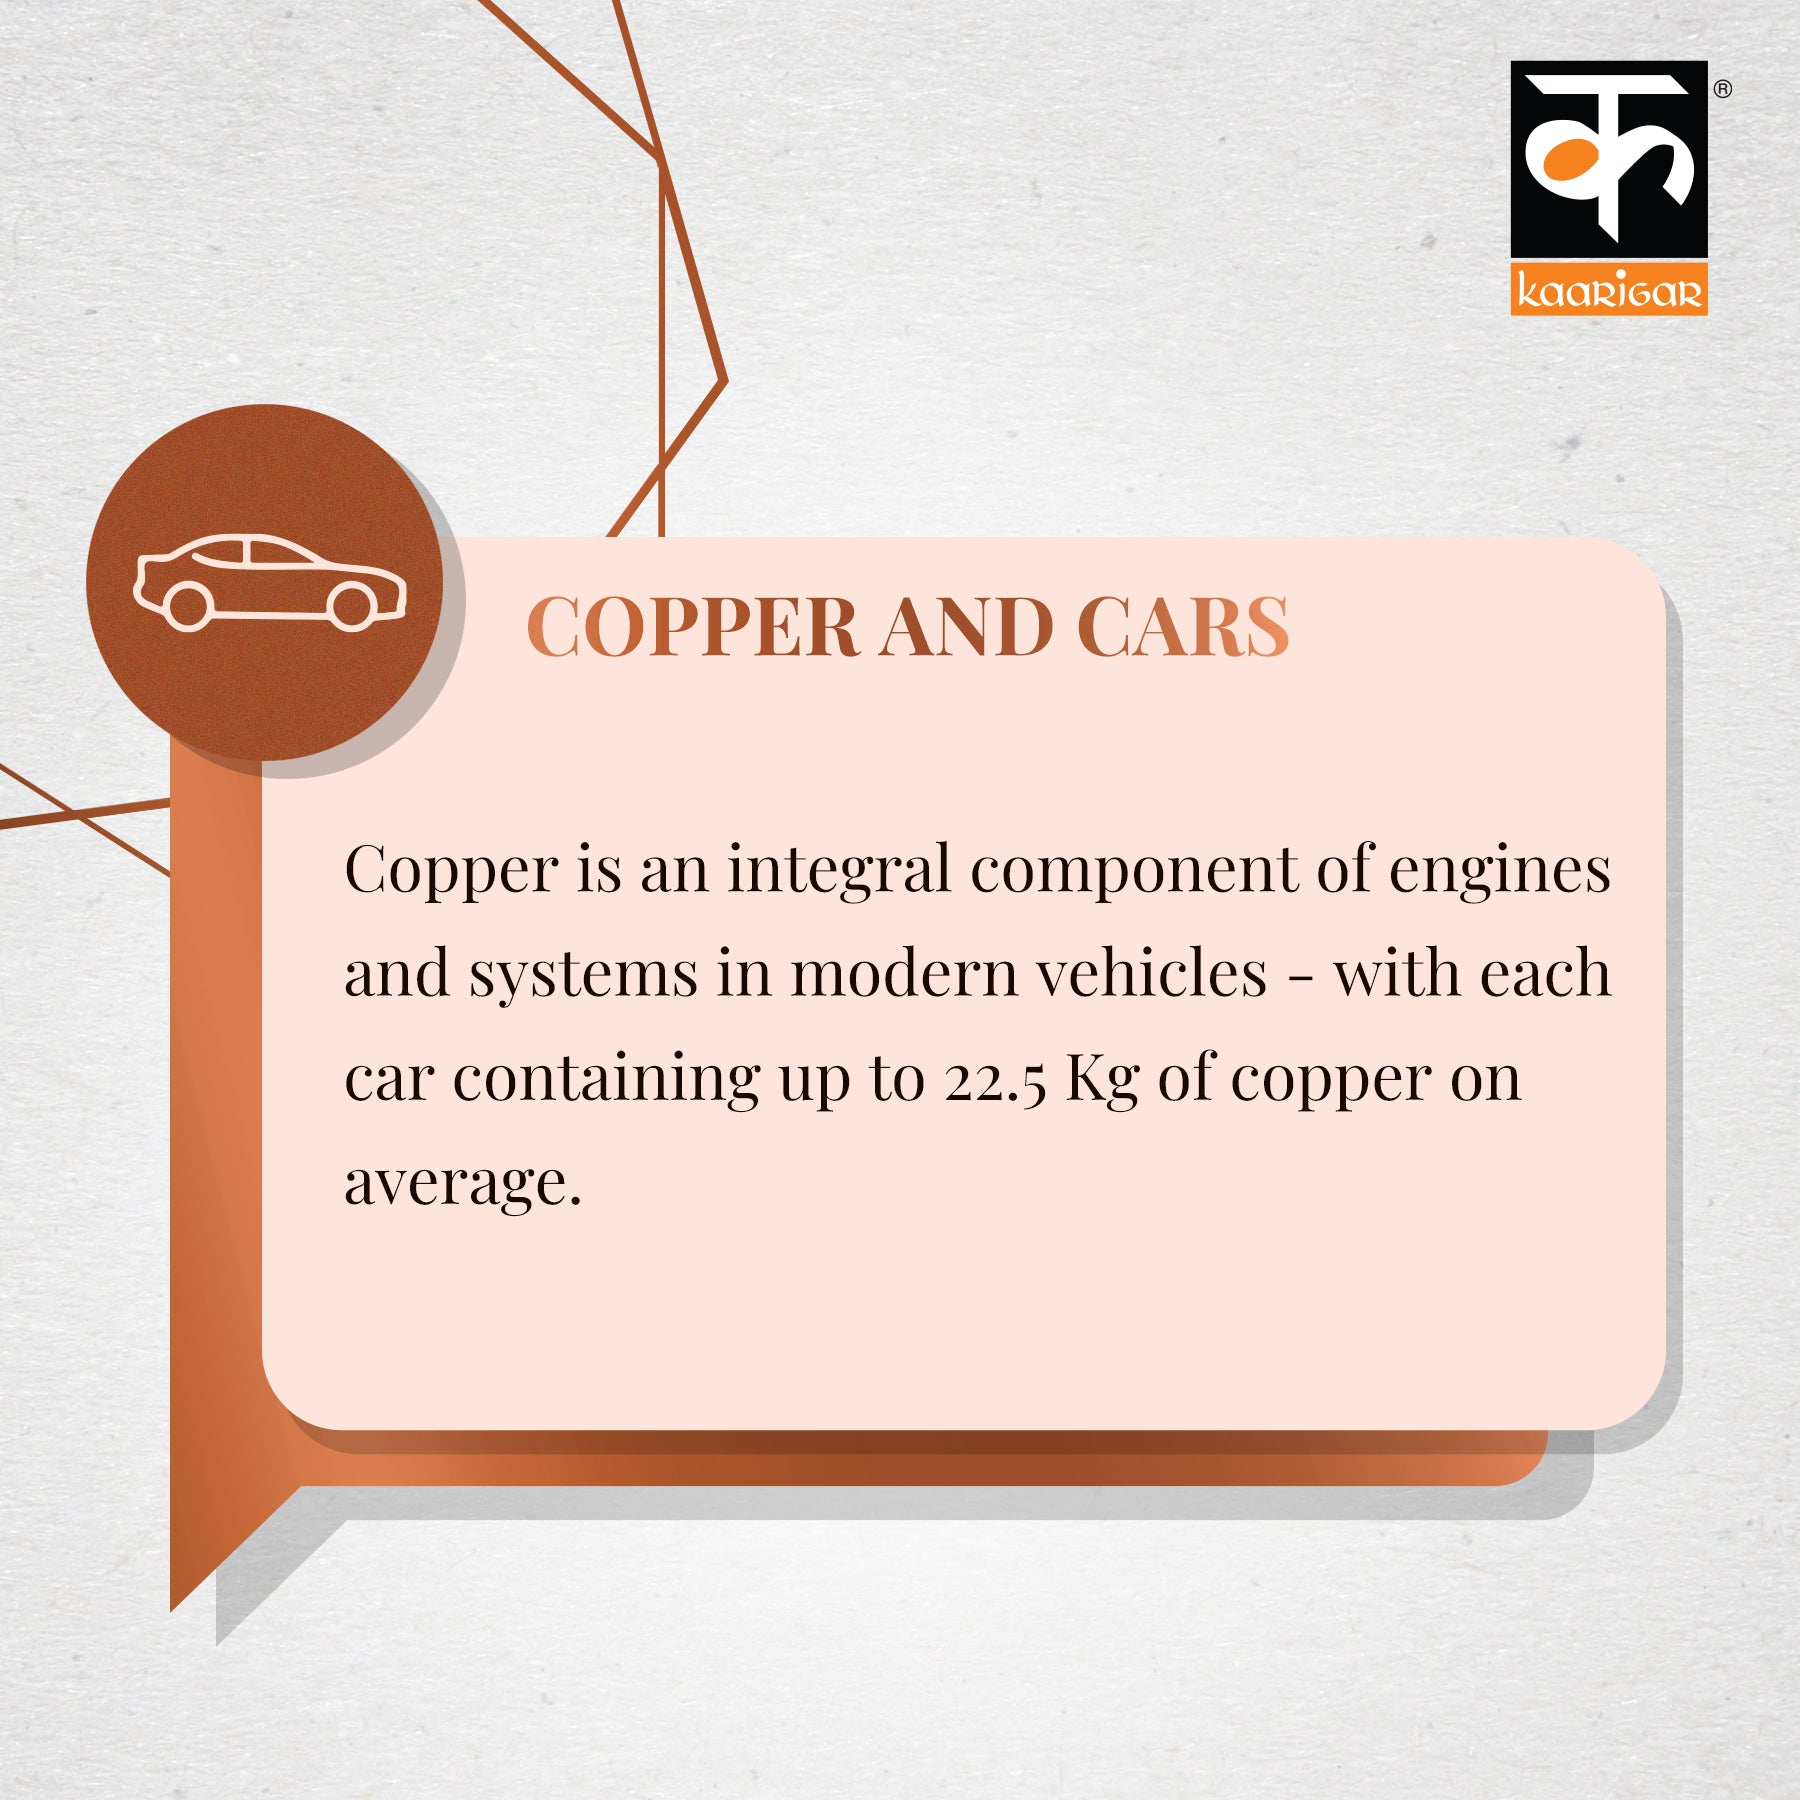 Copper and Cars